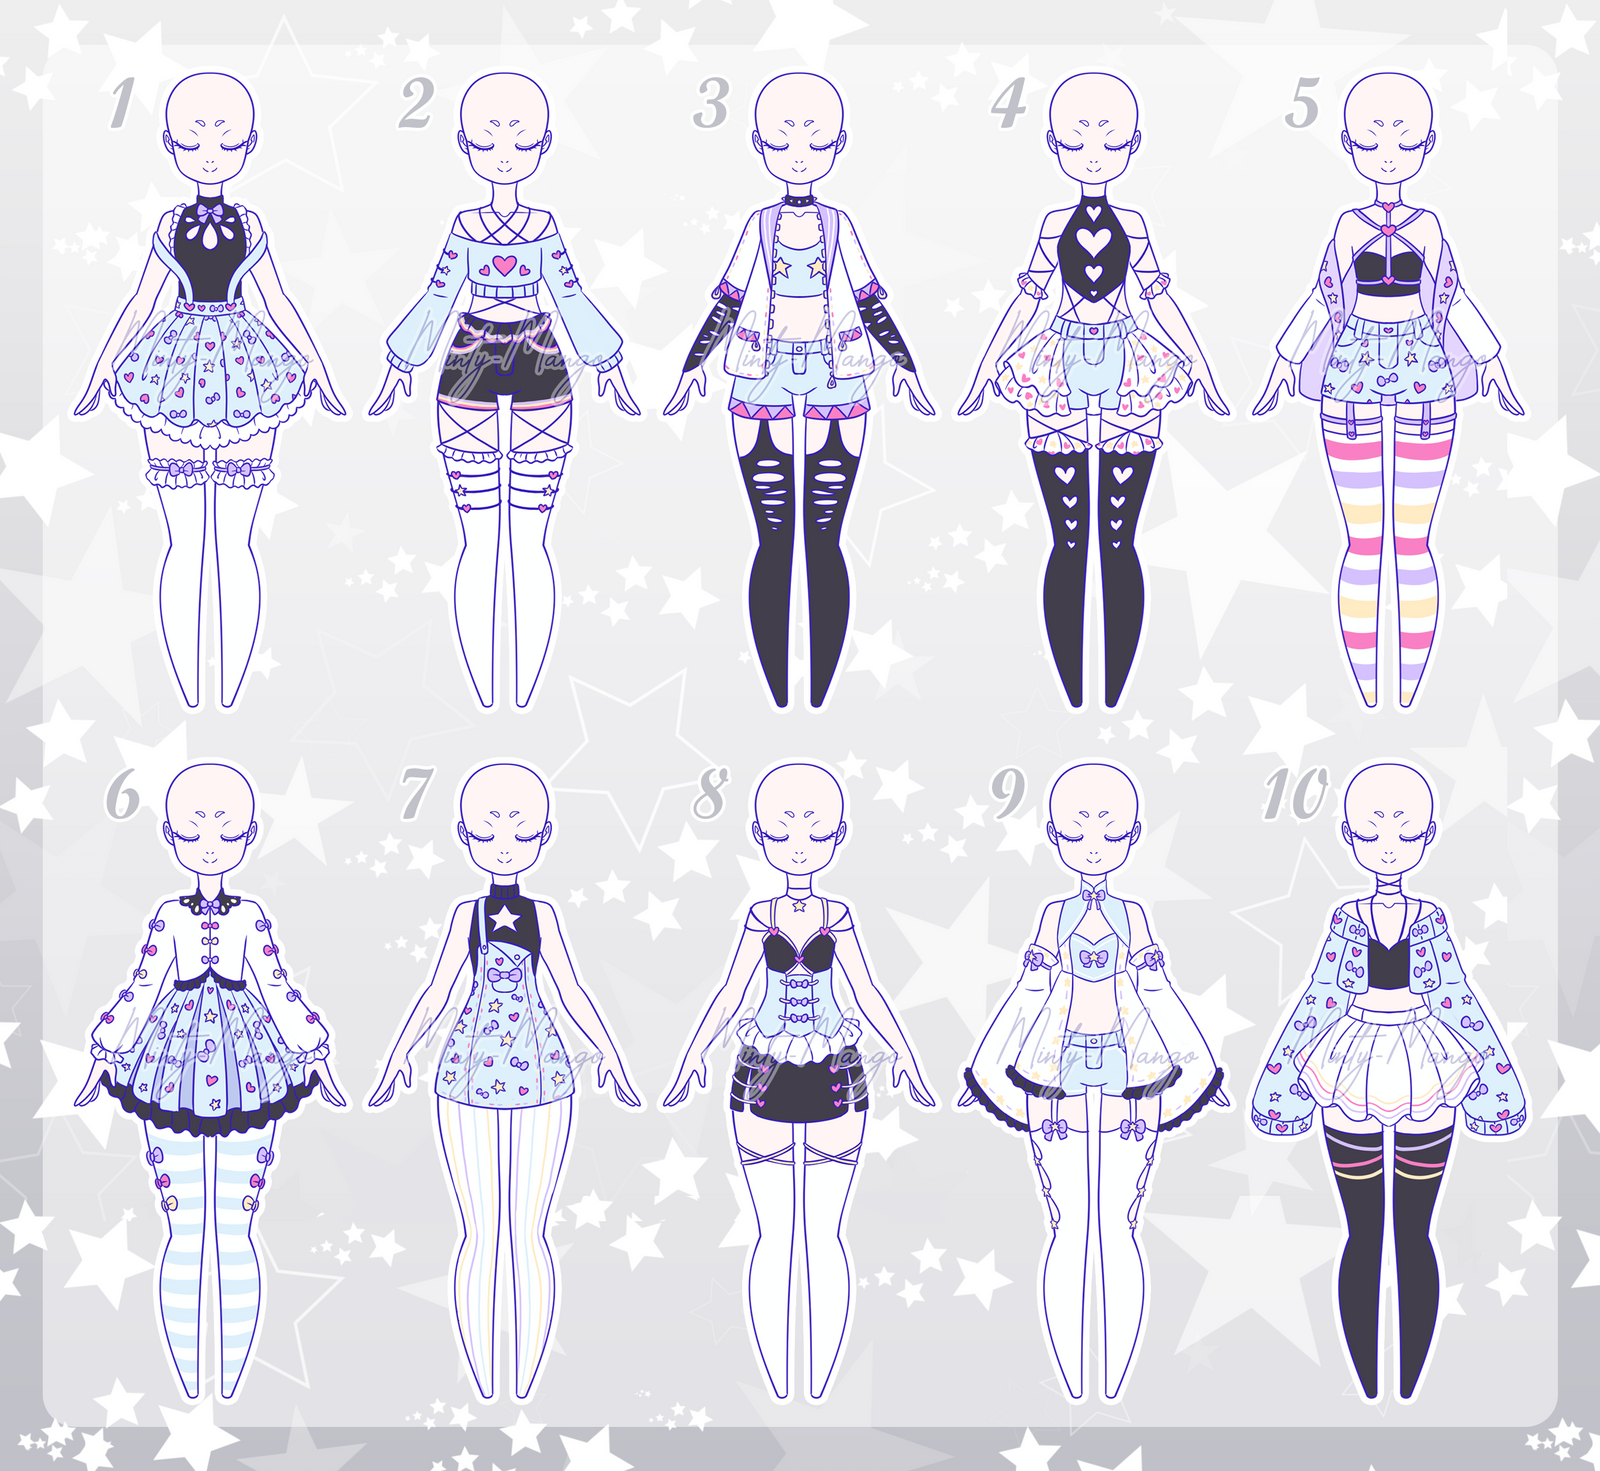 Outfit Adoptable Batch 62 - Closed by minty-mango on DeviantArt